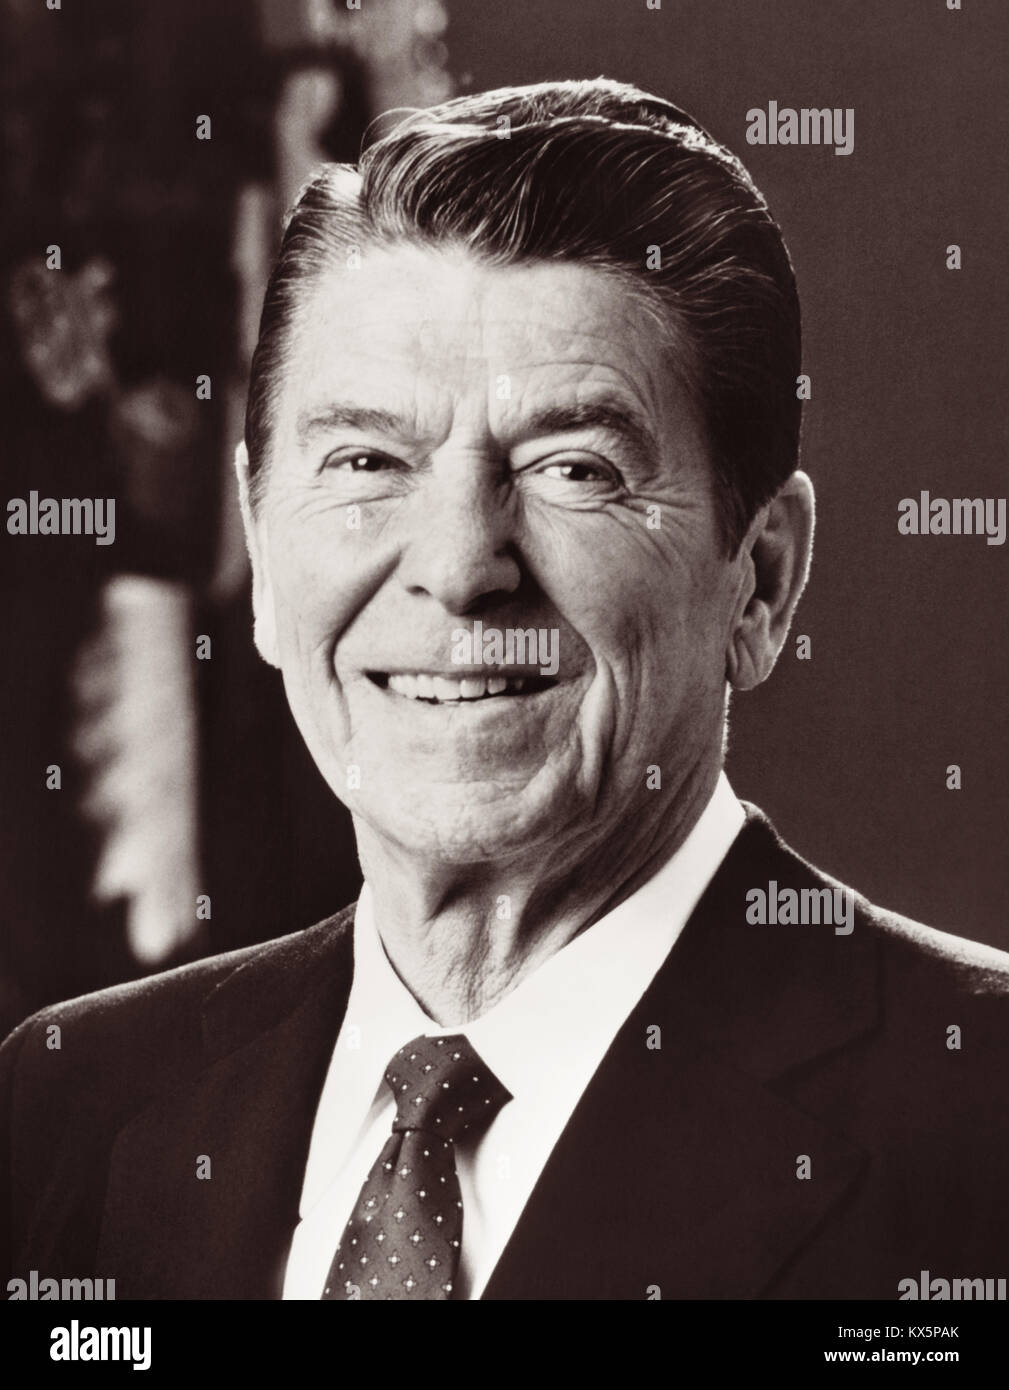 President Ronald Reagan (1911–2004), 40th President of the United States. Stock Photo